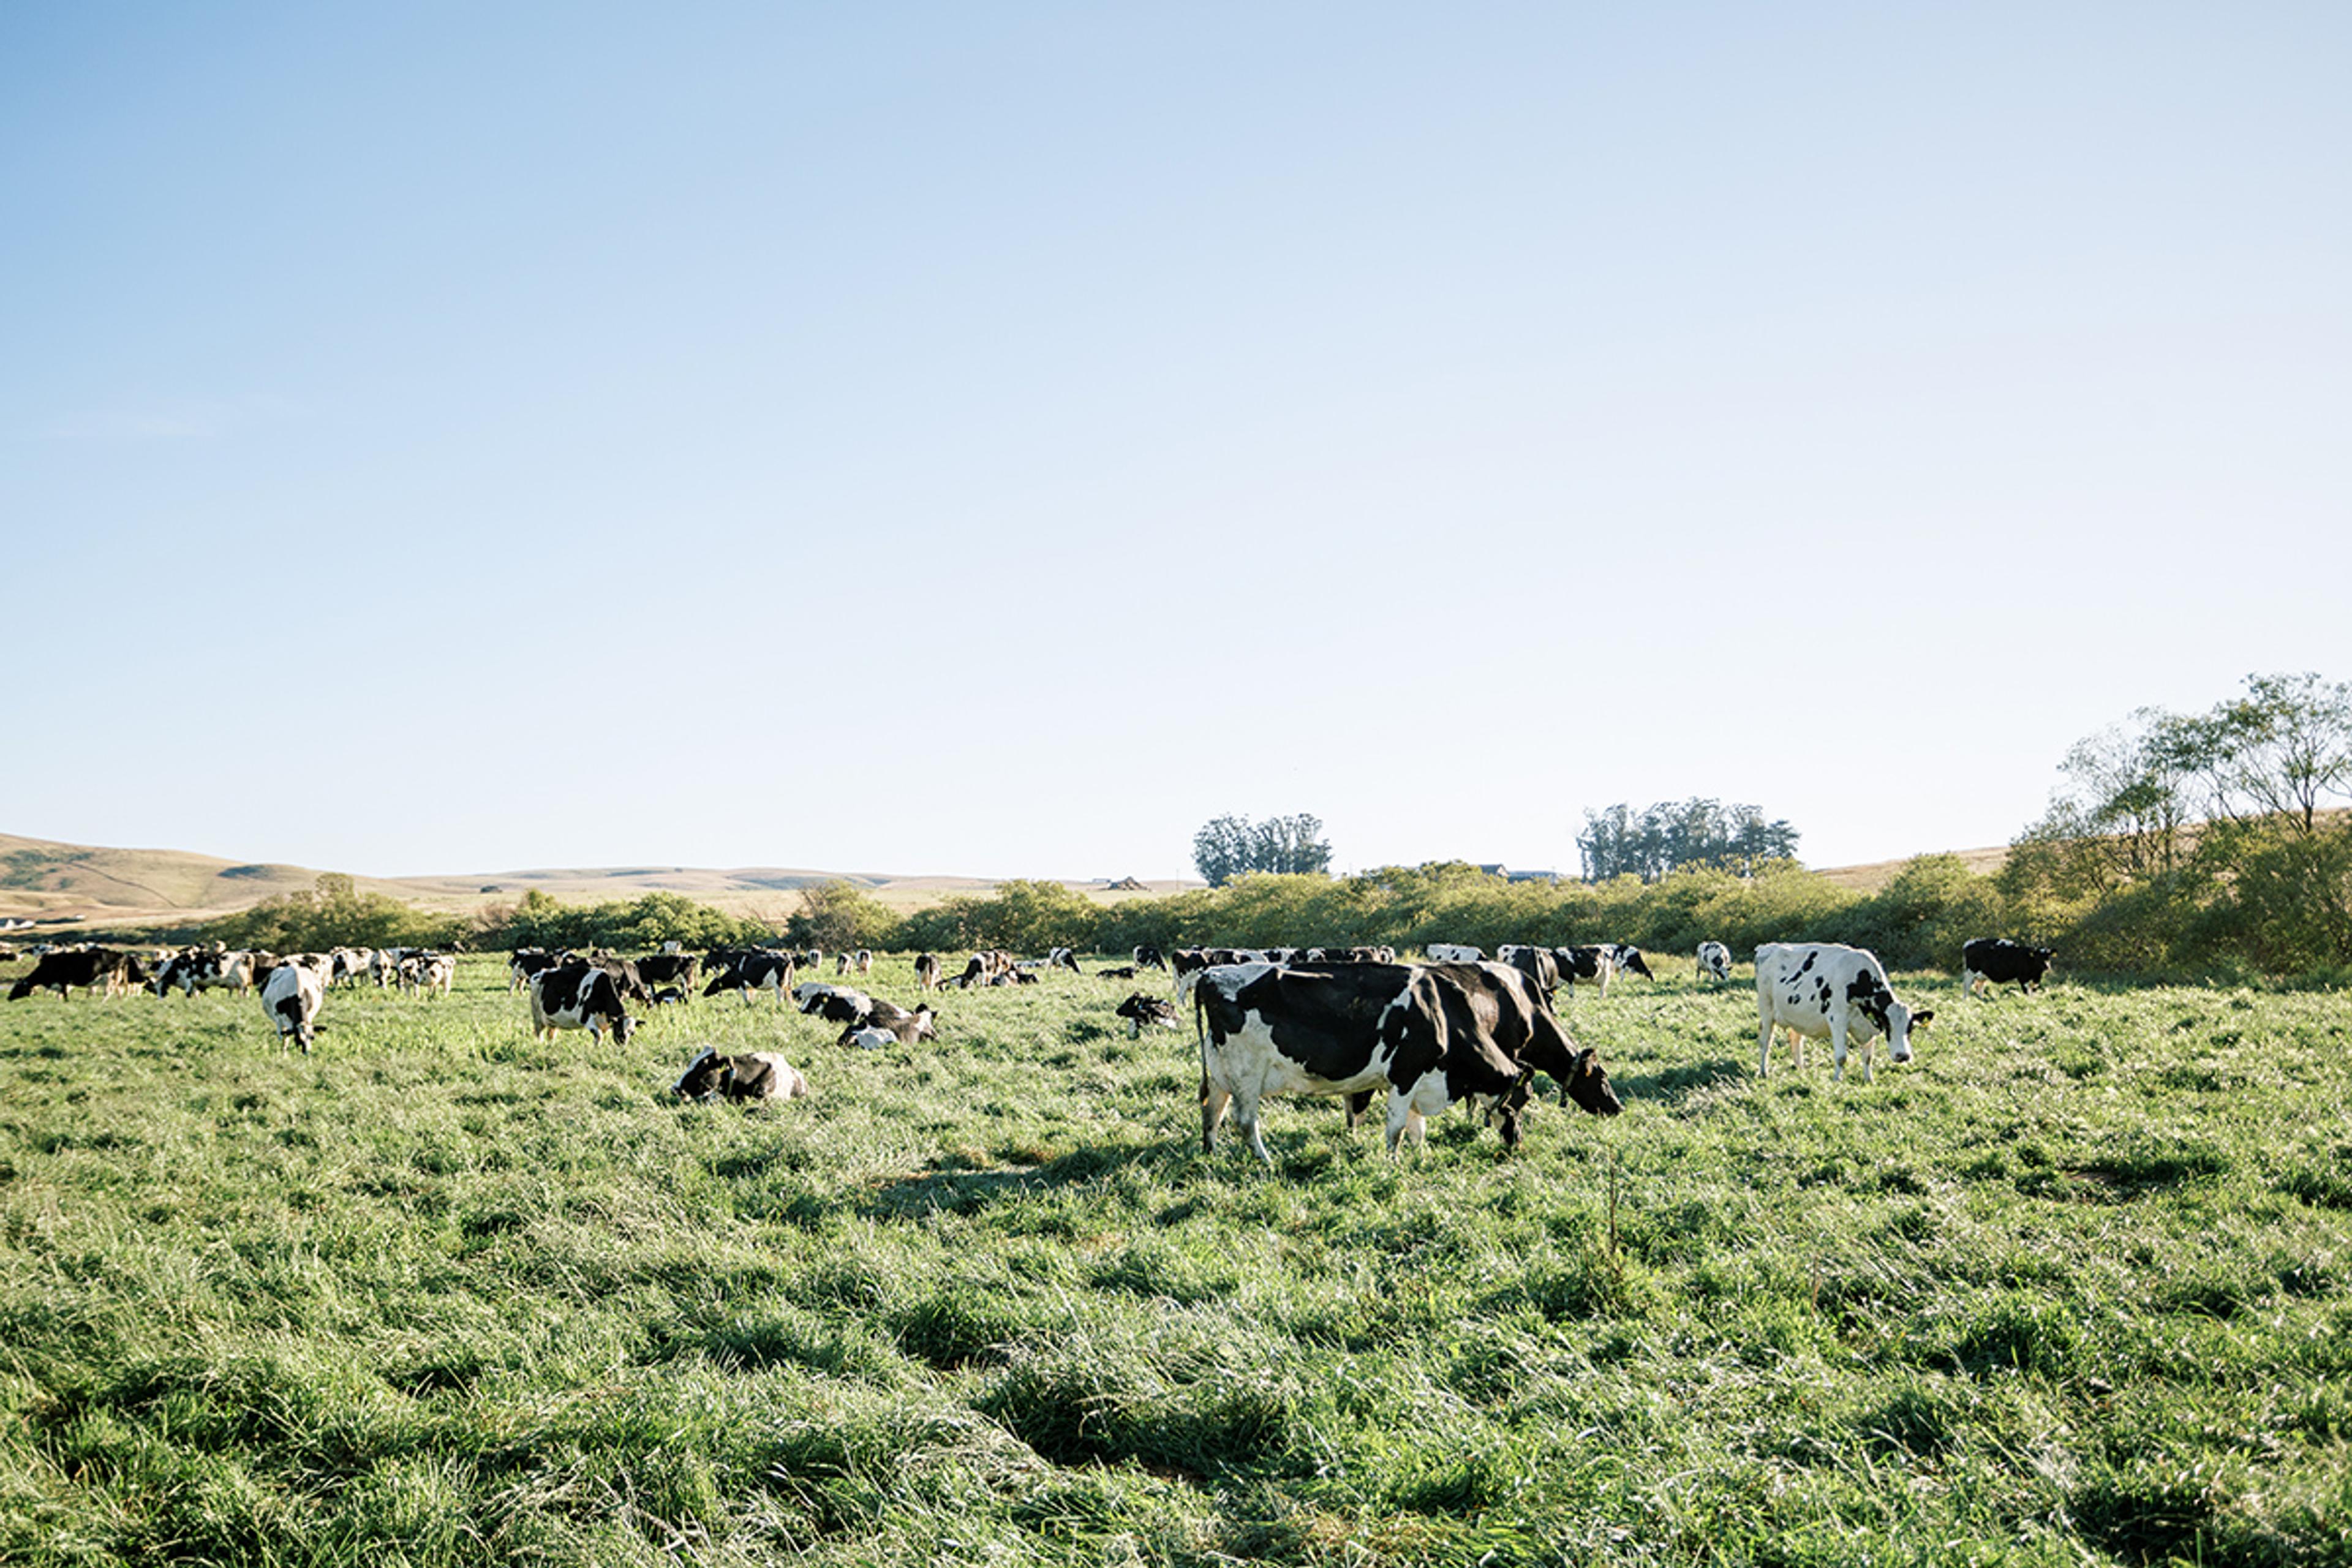 Cows graze on an open pasture in California.